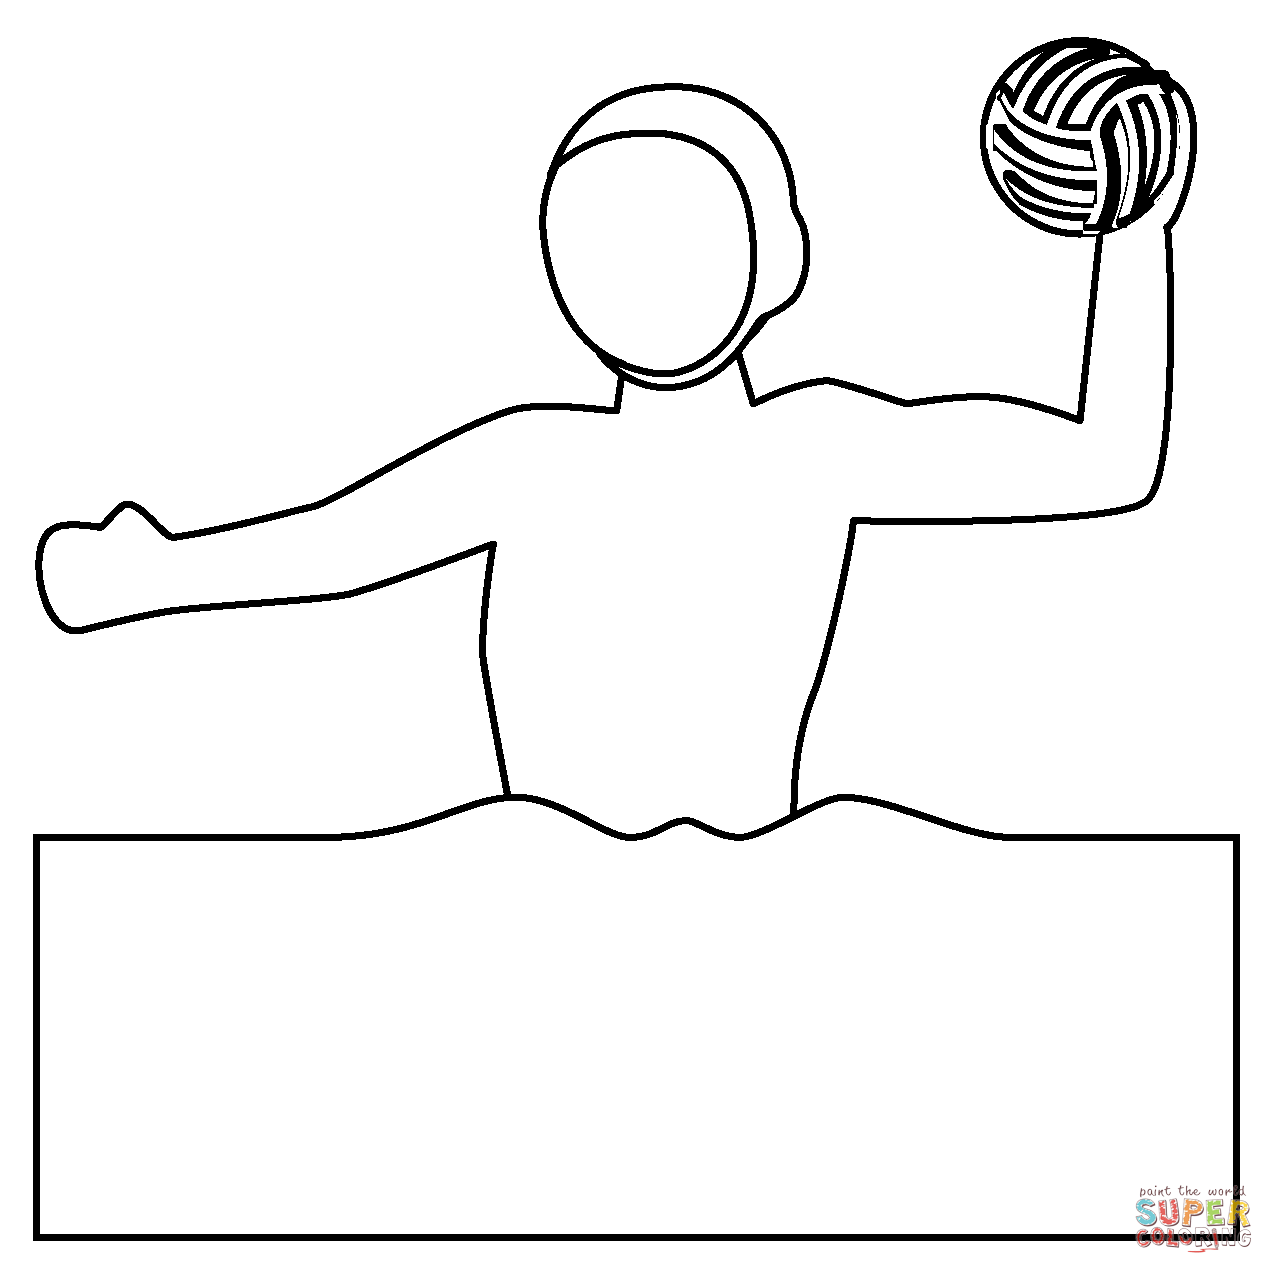 Man playing water polo emoji coloring page free printable coloring pages